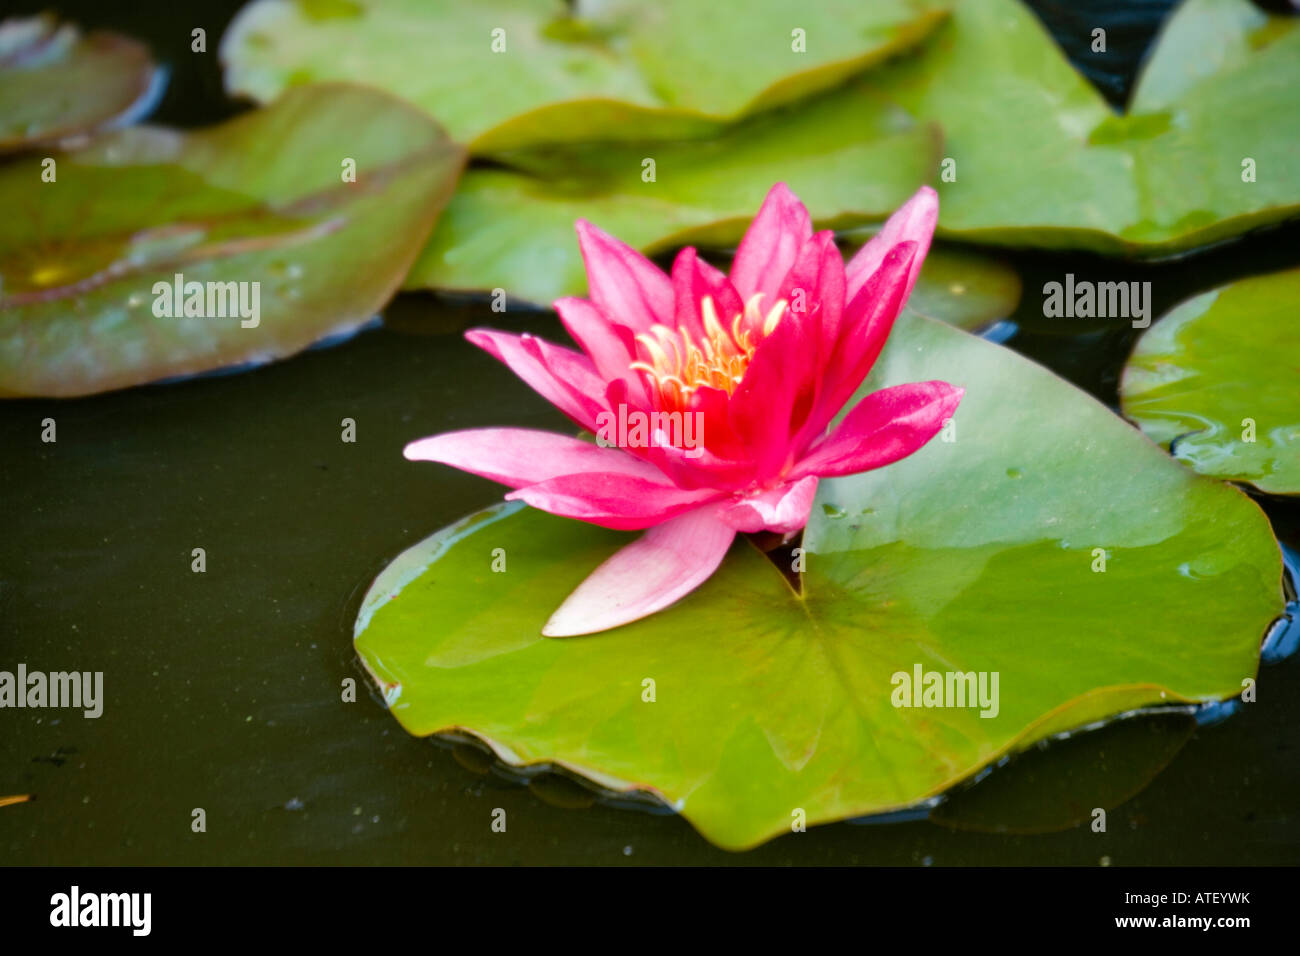 Pink water lily, Latin name : Nymphaea Stock Photo